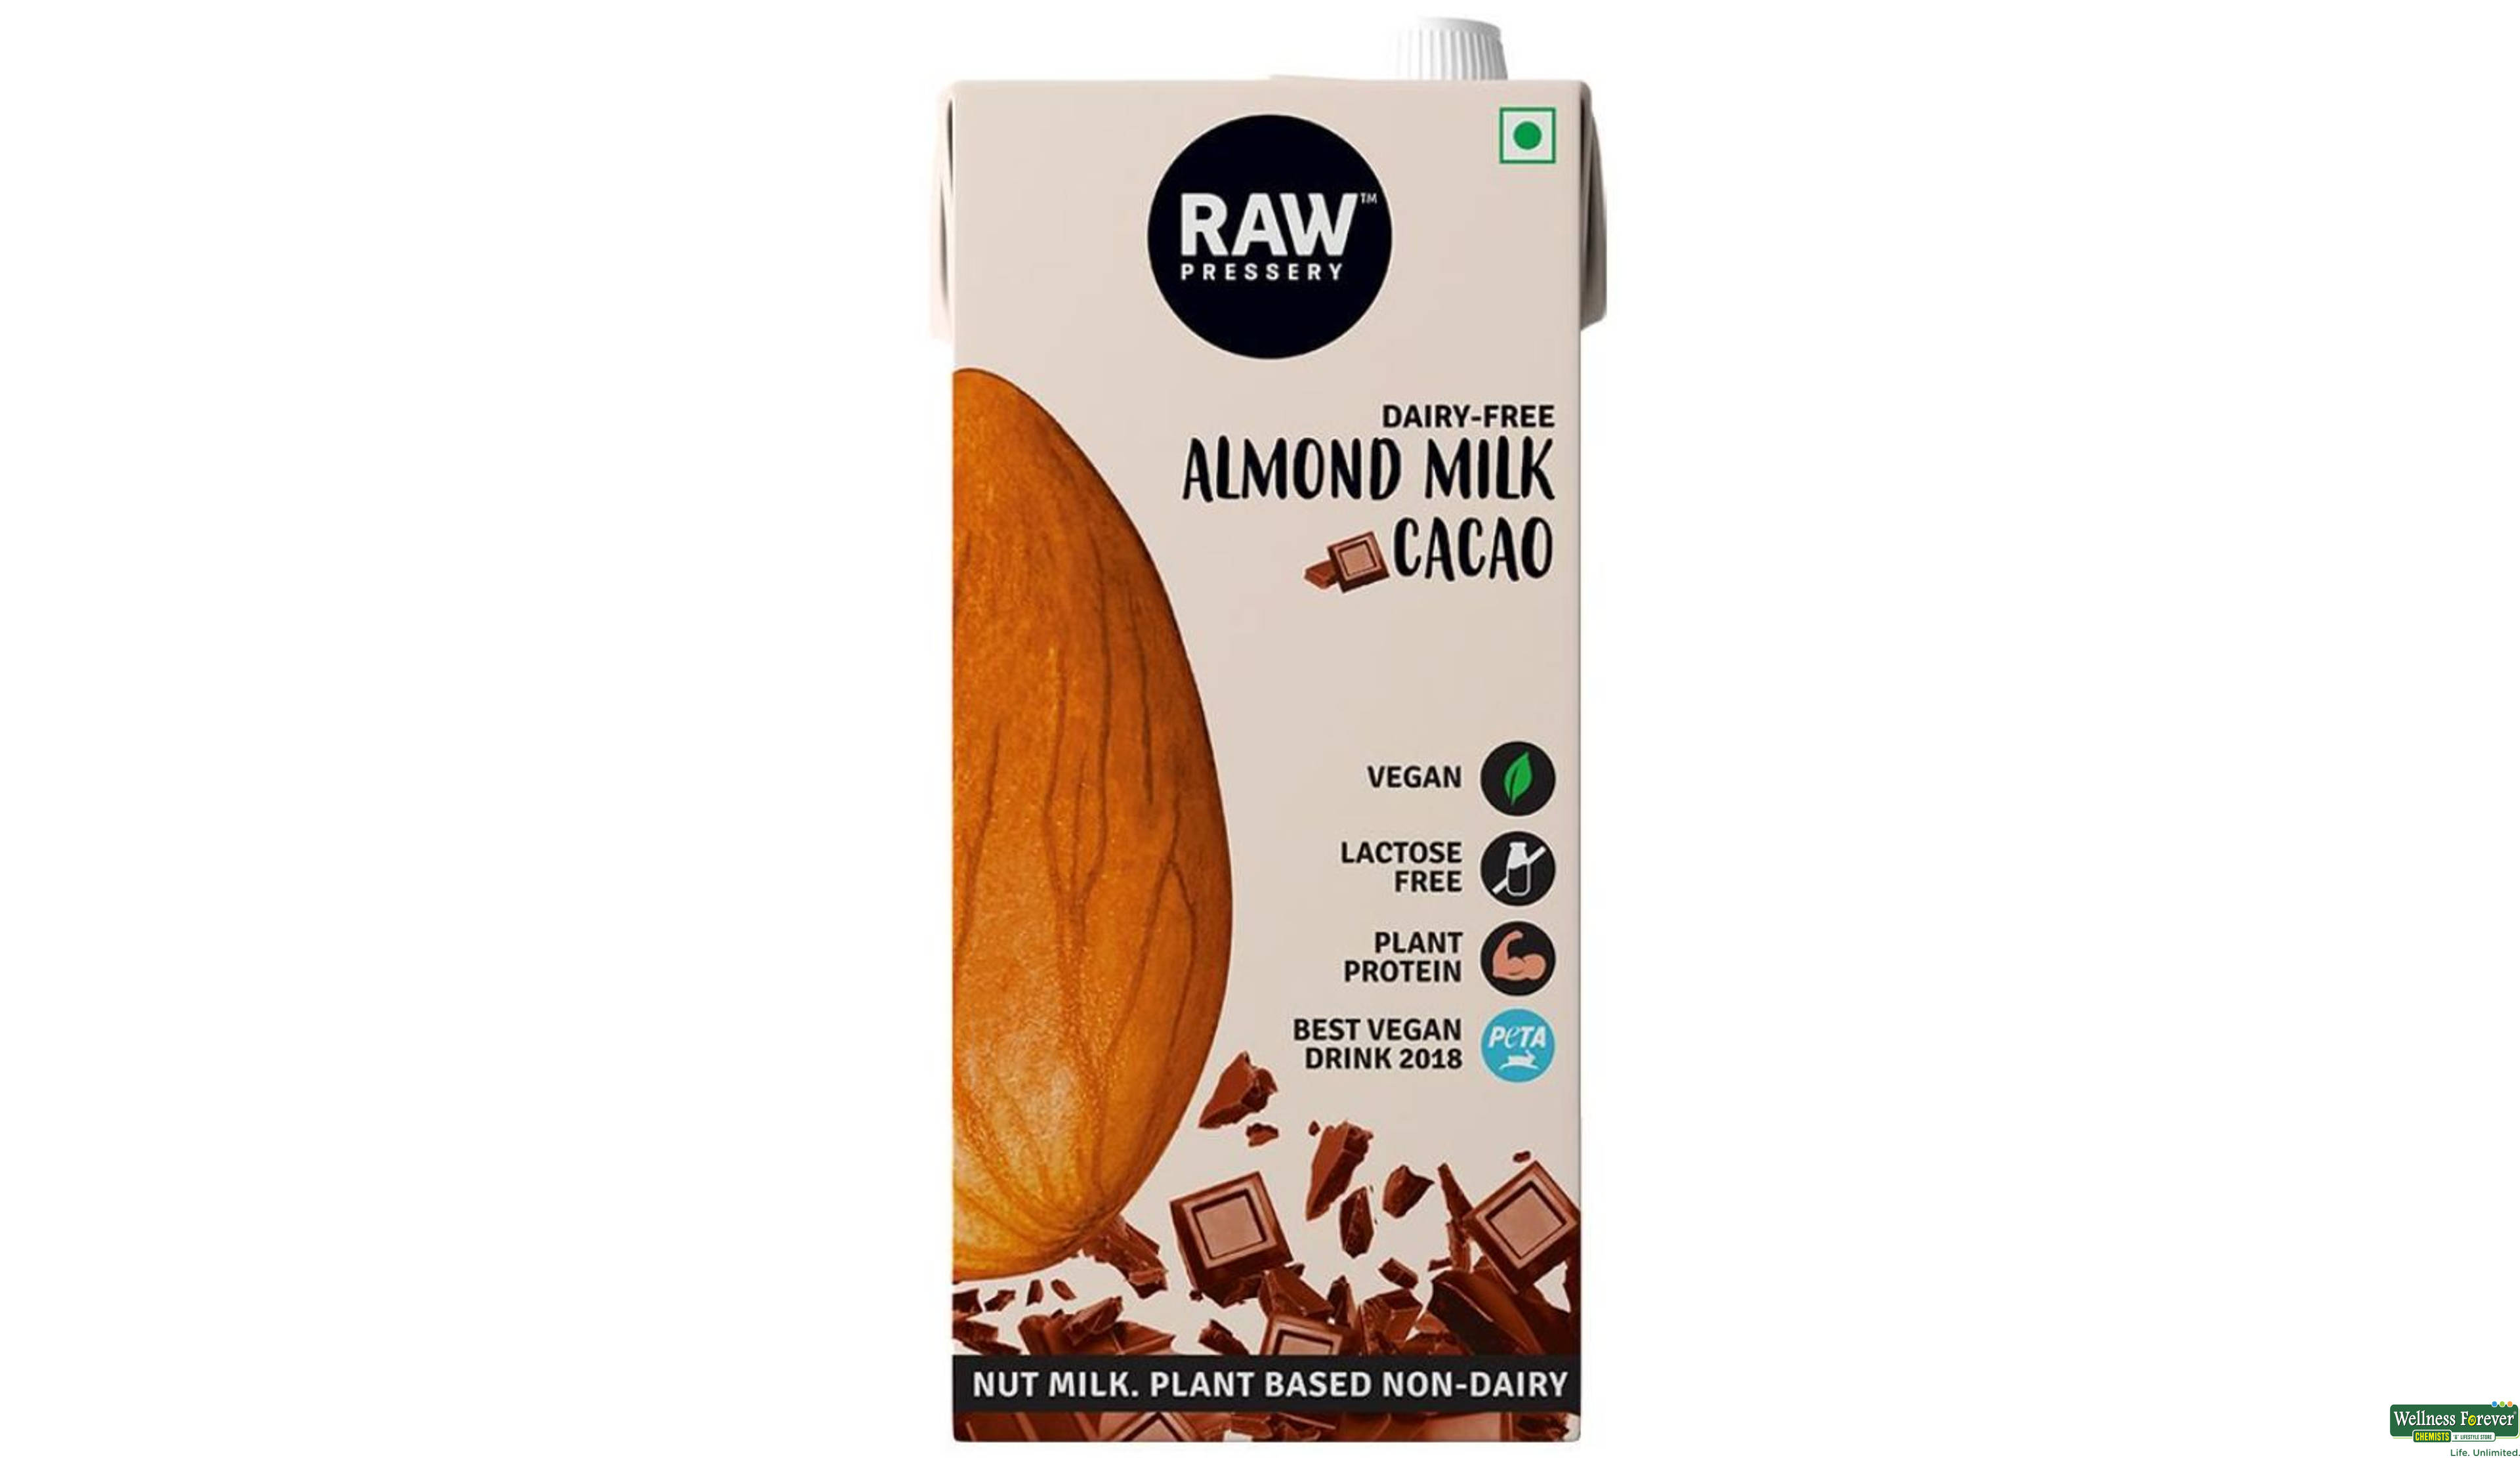 RAW PRESSERY ALMOND MILK CACAO 1LTR- 1, 1LTR, null